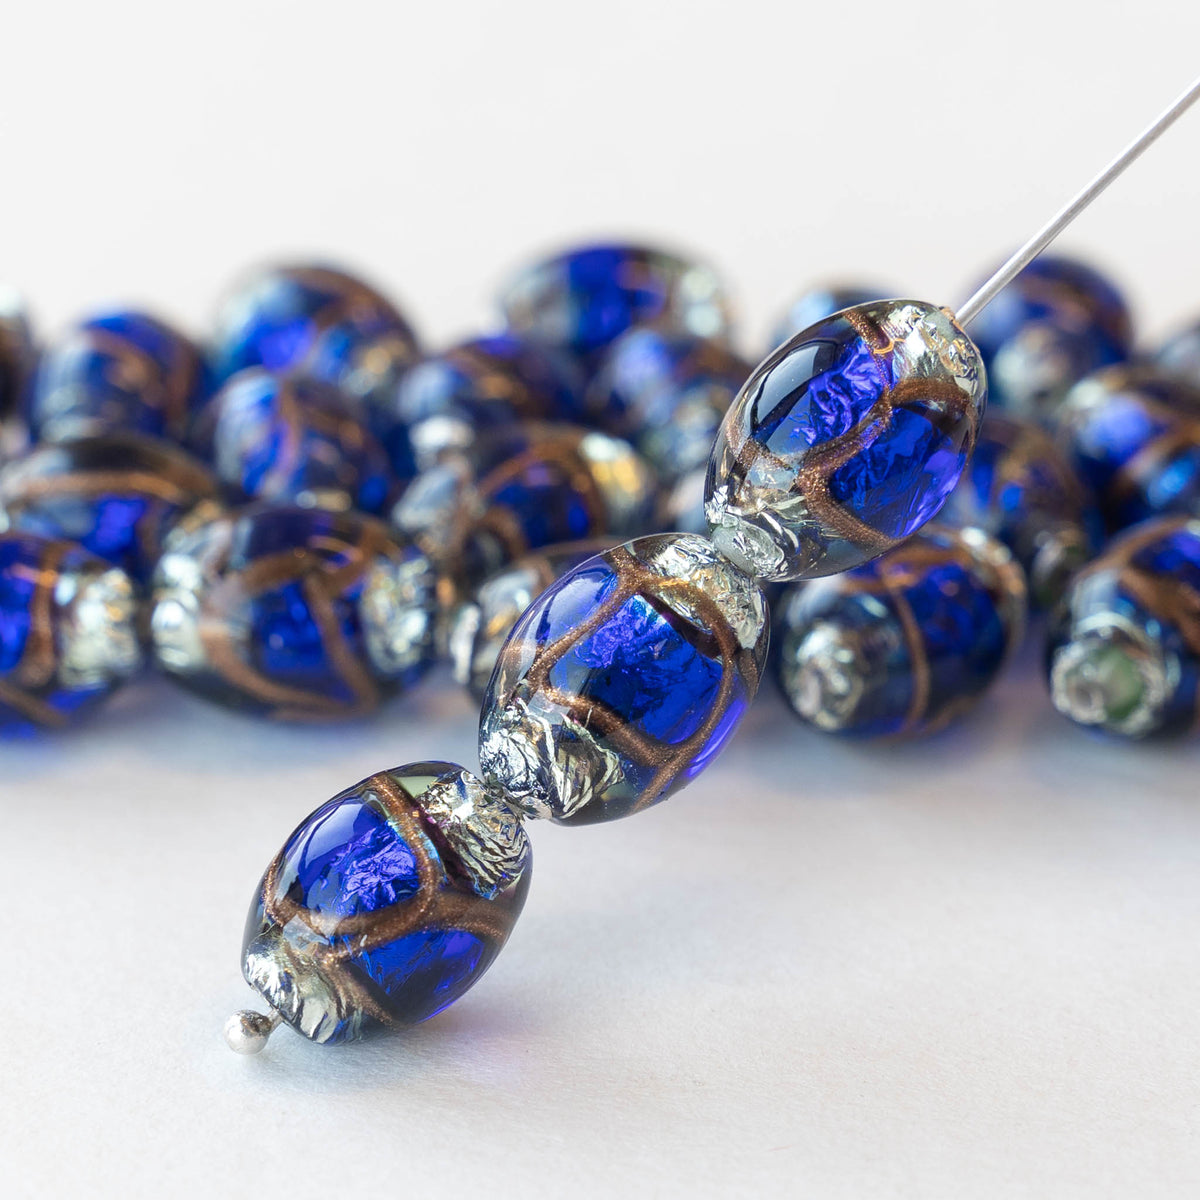 Hand Faceted Leaded Glass Beads in Cobalt Blue ~ 3 sizes